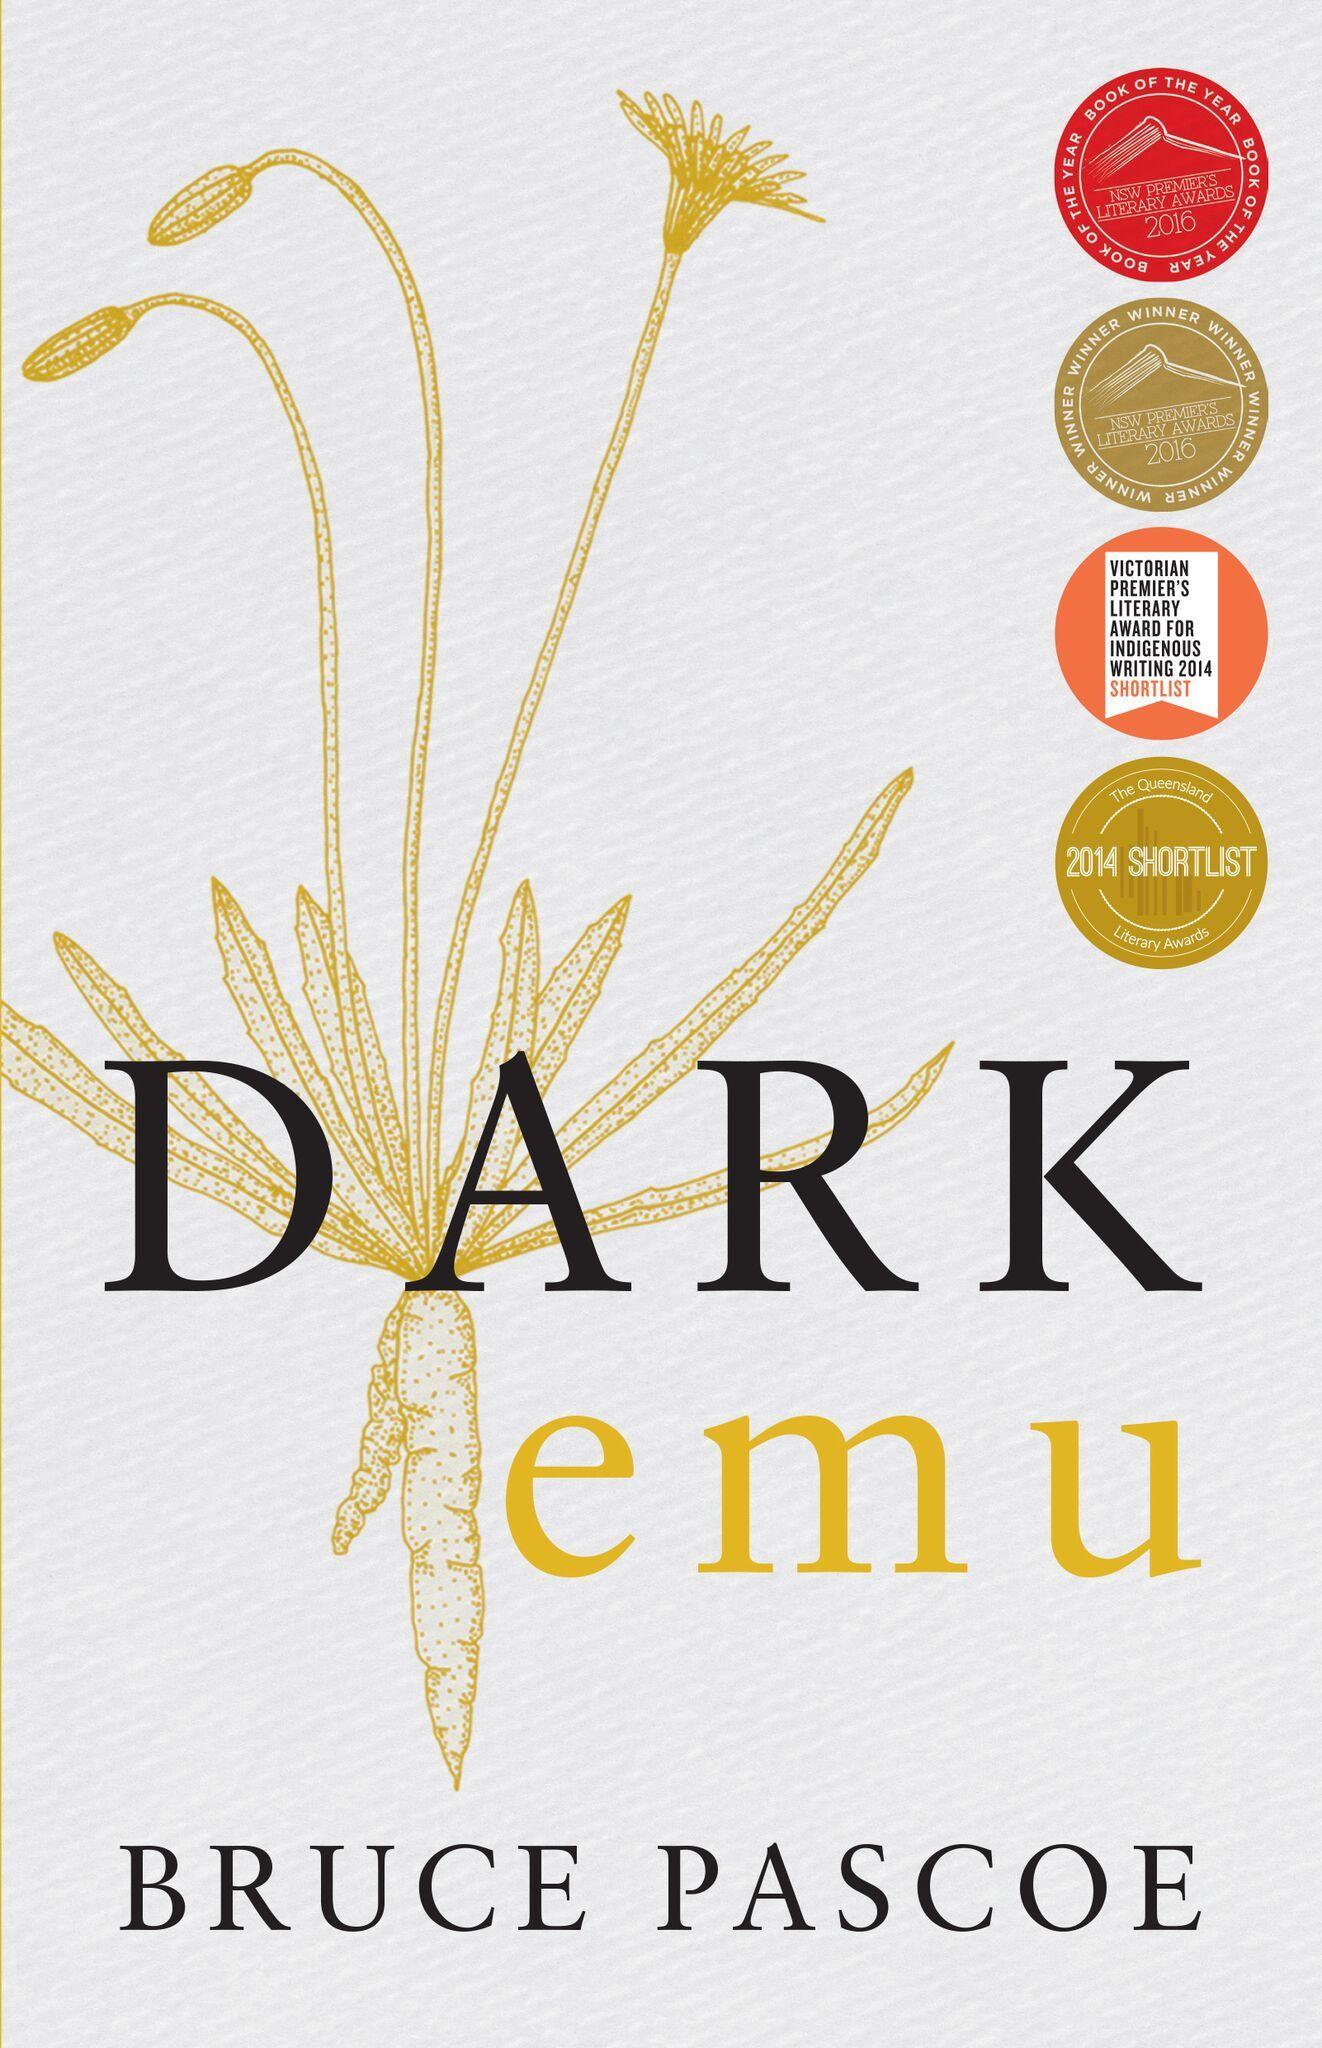 Book cover for Dark Emu by Bruce Pascoe showing an illustration of a plant behind the title, and four literary award stickers